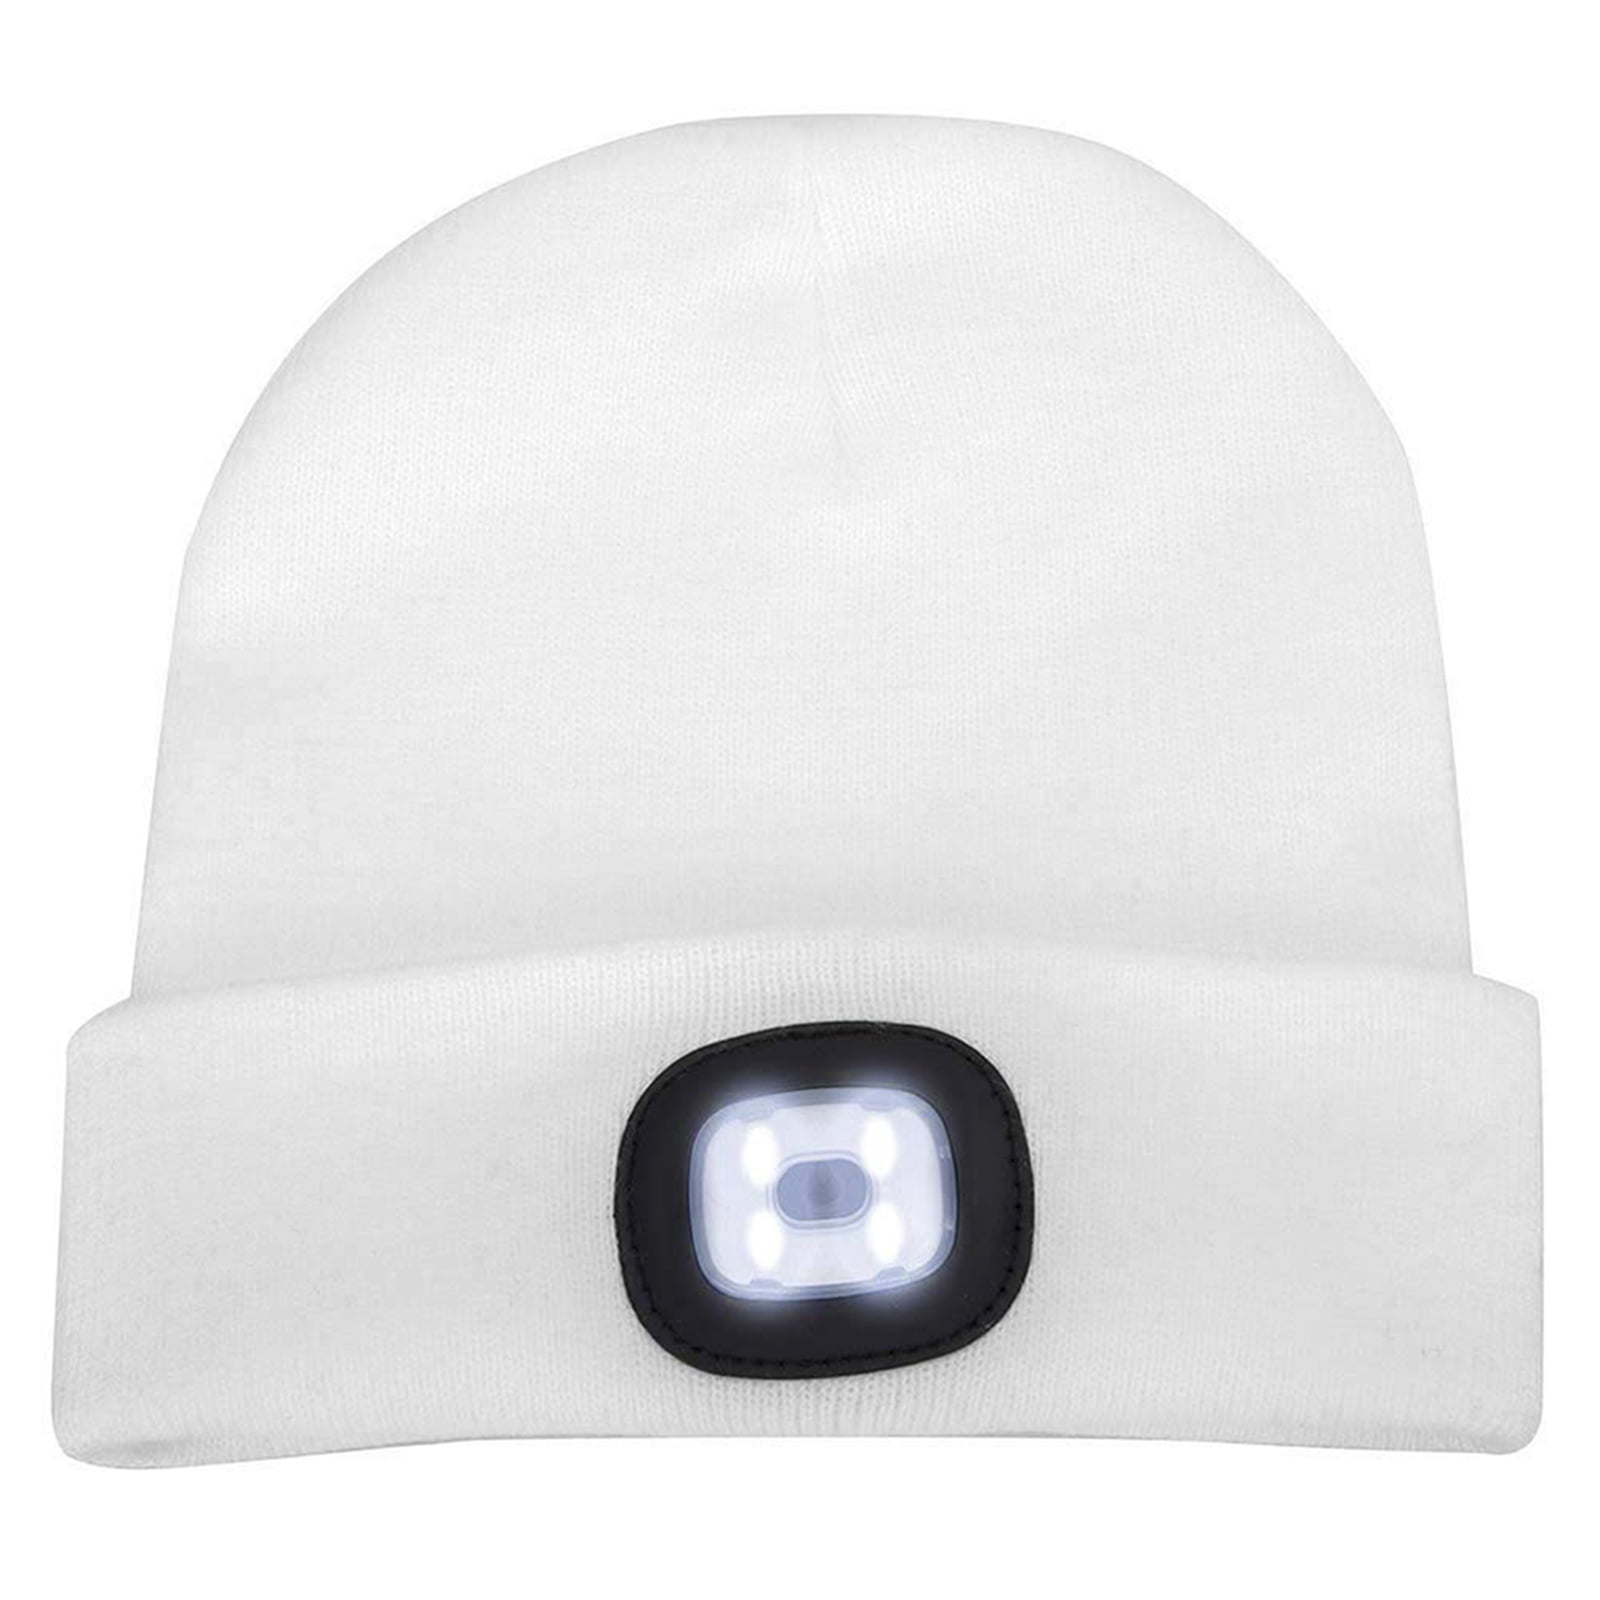 6LED Knit Hat USB Rechargeable Hands Free Flashlight Cap for Climbing Fishing